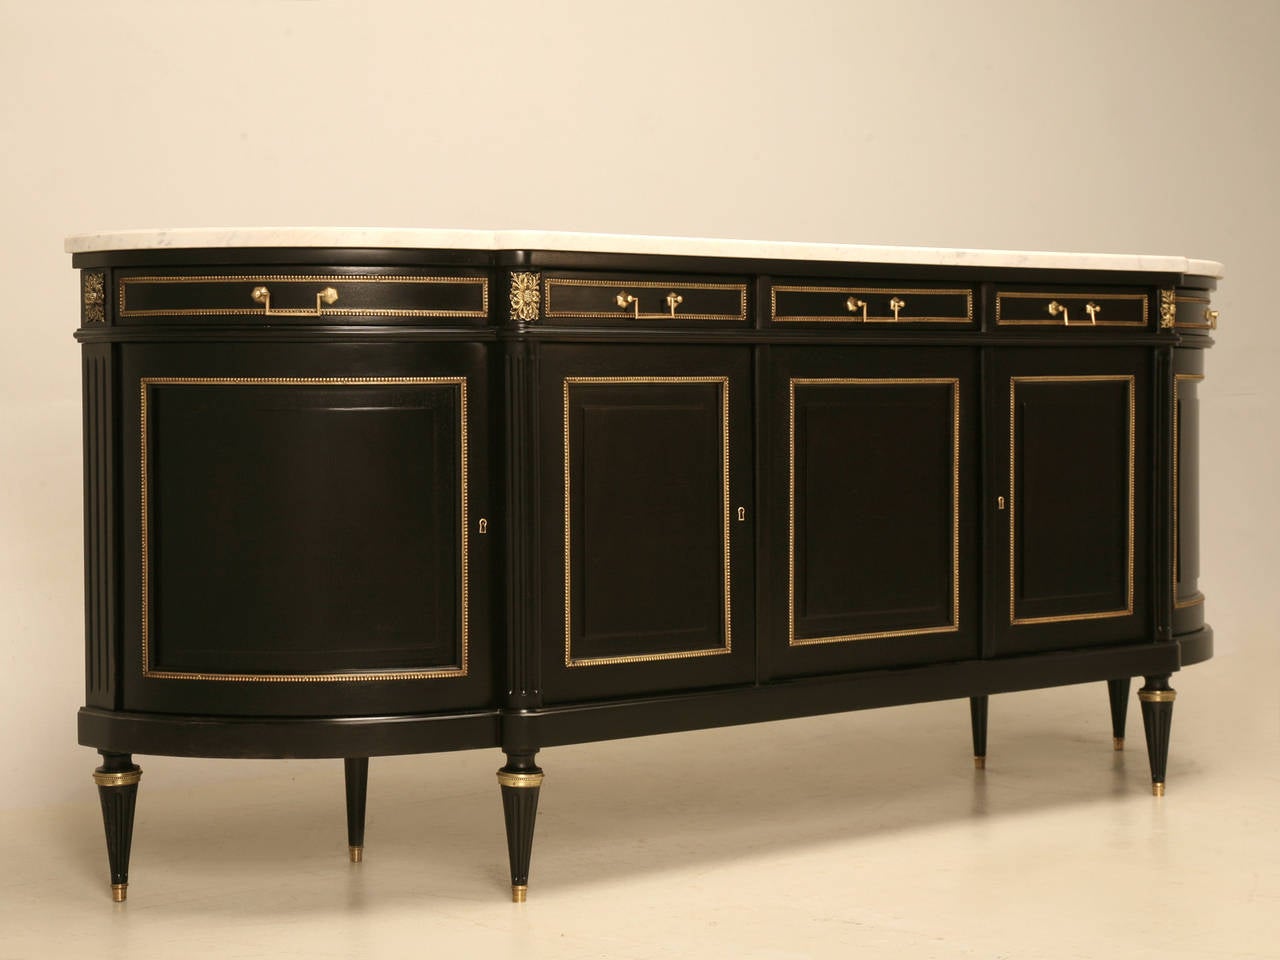 Vintage French ebonized mahogany buffet, complimented by a beautiful white marble top. Our workshop hand scraped and hand sanded the entire sideboard to the bare wood, then applied layer upon layer on dark stains to emulate an original 19th ebonized